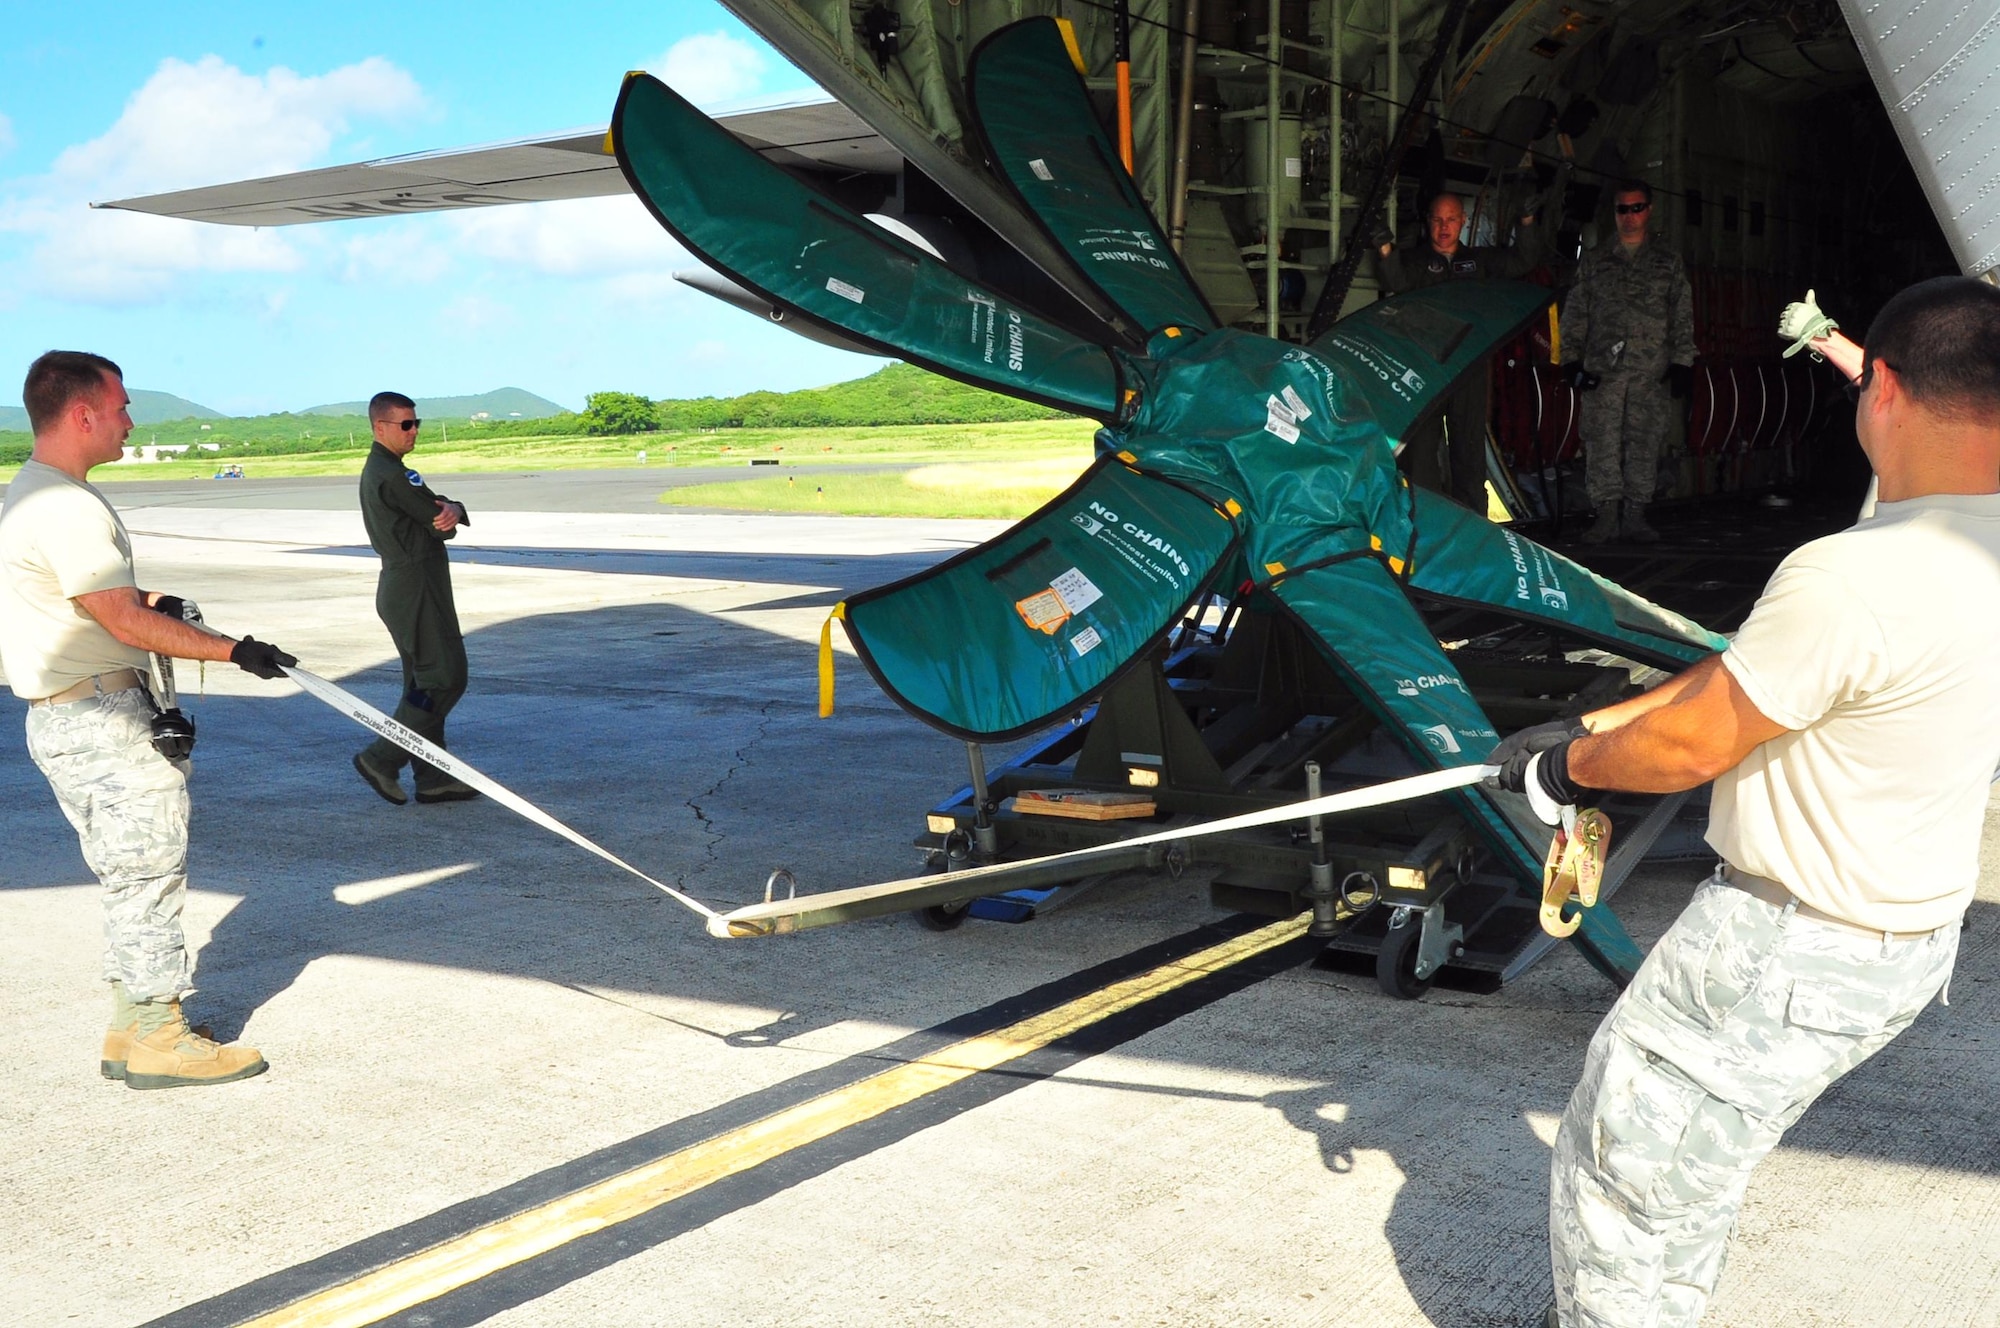 Reservists from the 403rd Wing, Keesler Air Force Base, Miss., load a propeller onto a WC-130J at Henry E. Rohlsen Airport, St. Croix, U.S. Virgin Islands, Dec. 12, 2013. Aircrews from the 53rd Weather Reconnaissance Squadron, known as the Hurricane Hunters, forward deploy to St. Croix to fly storms on the Atlantic side during hurricane season. 